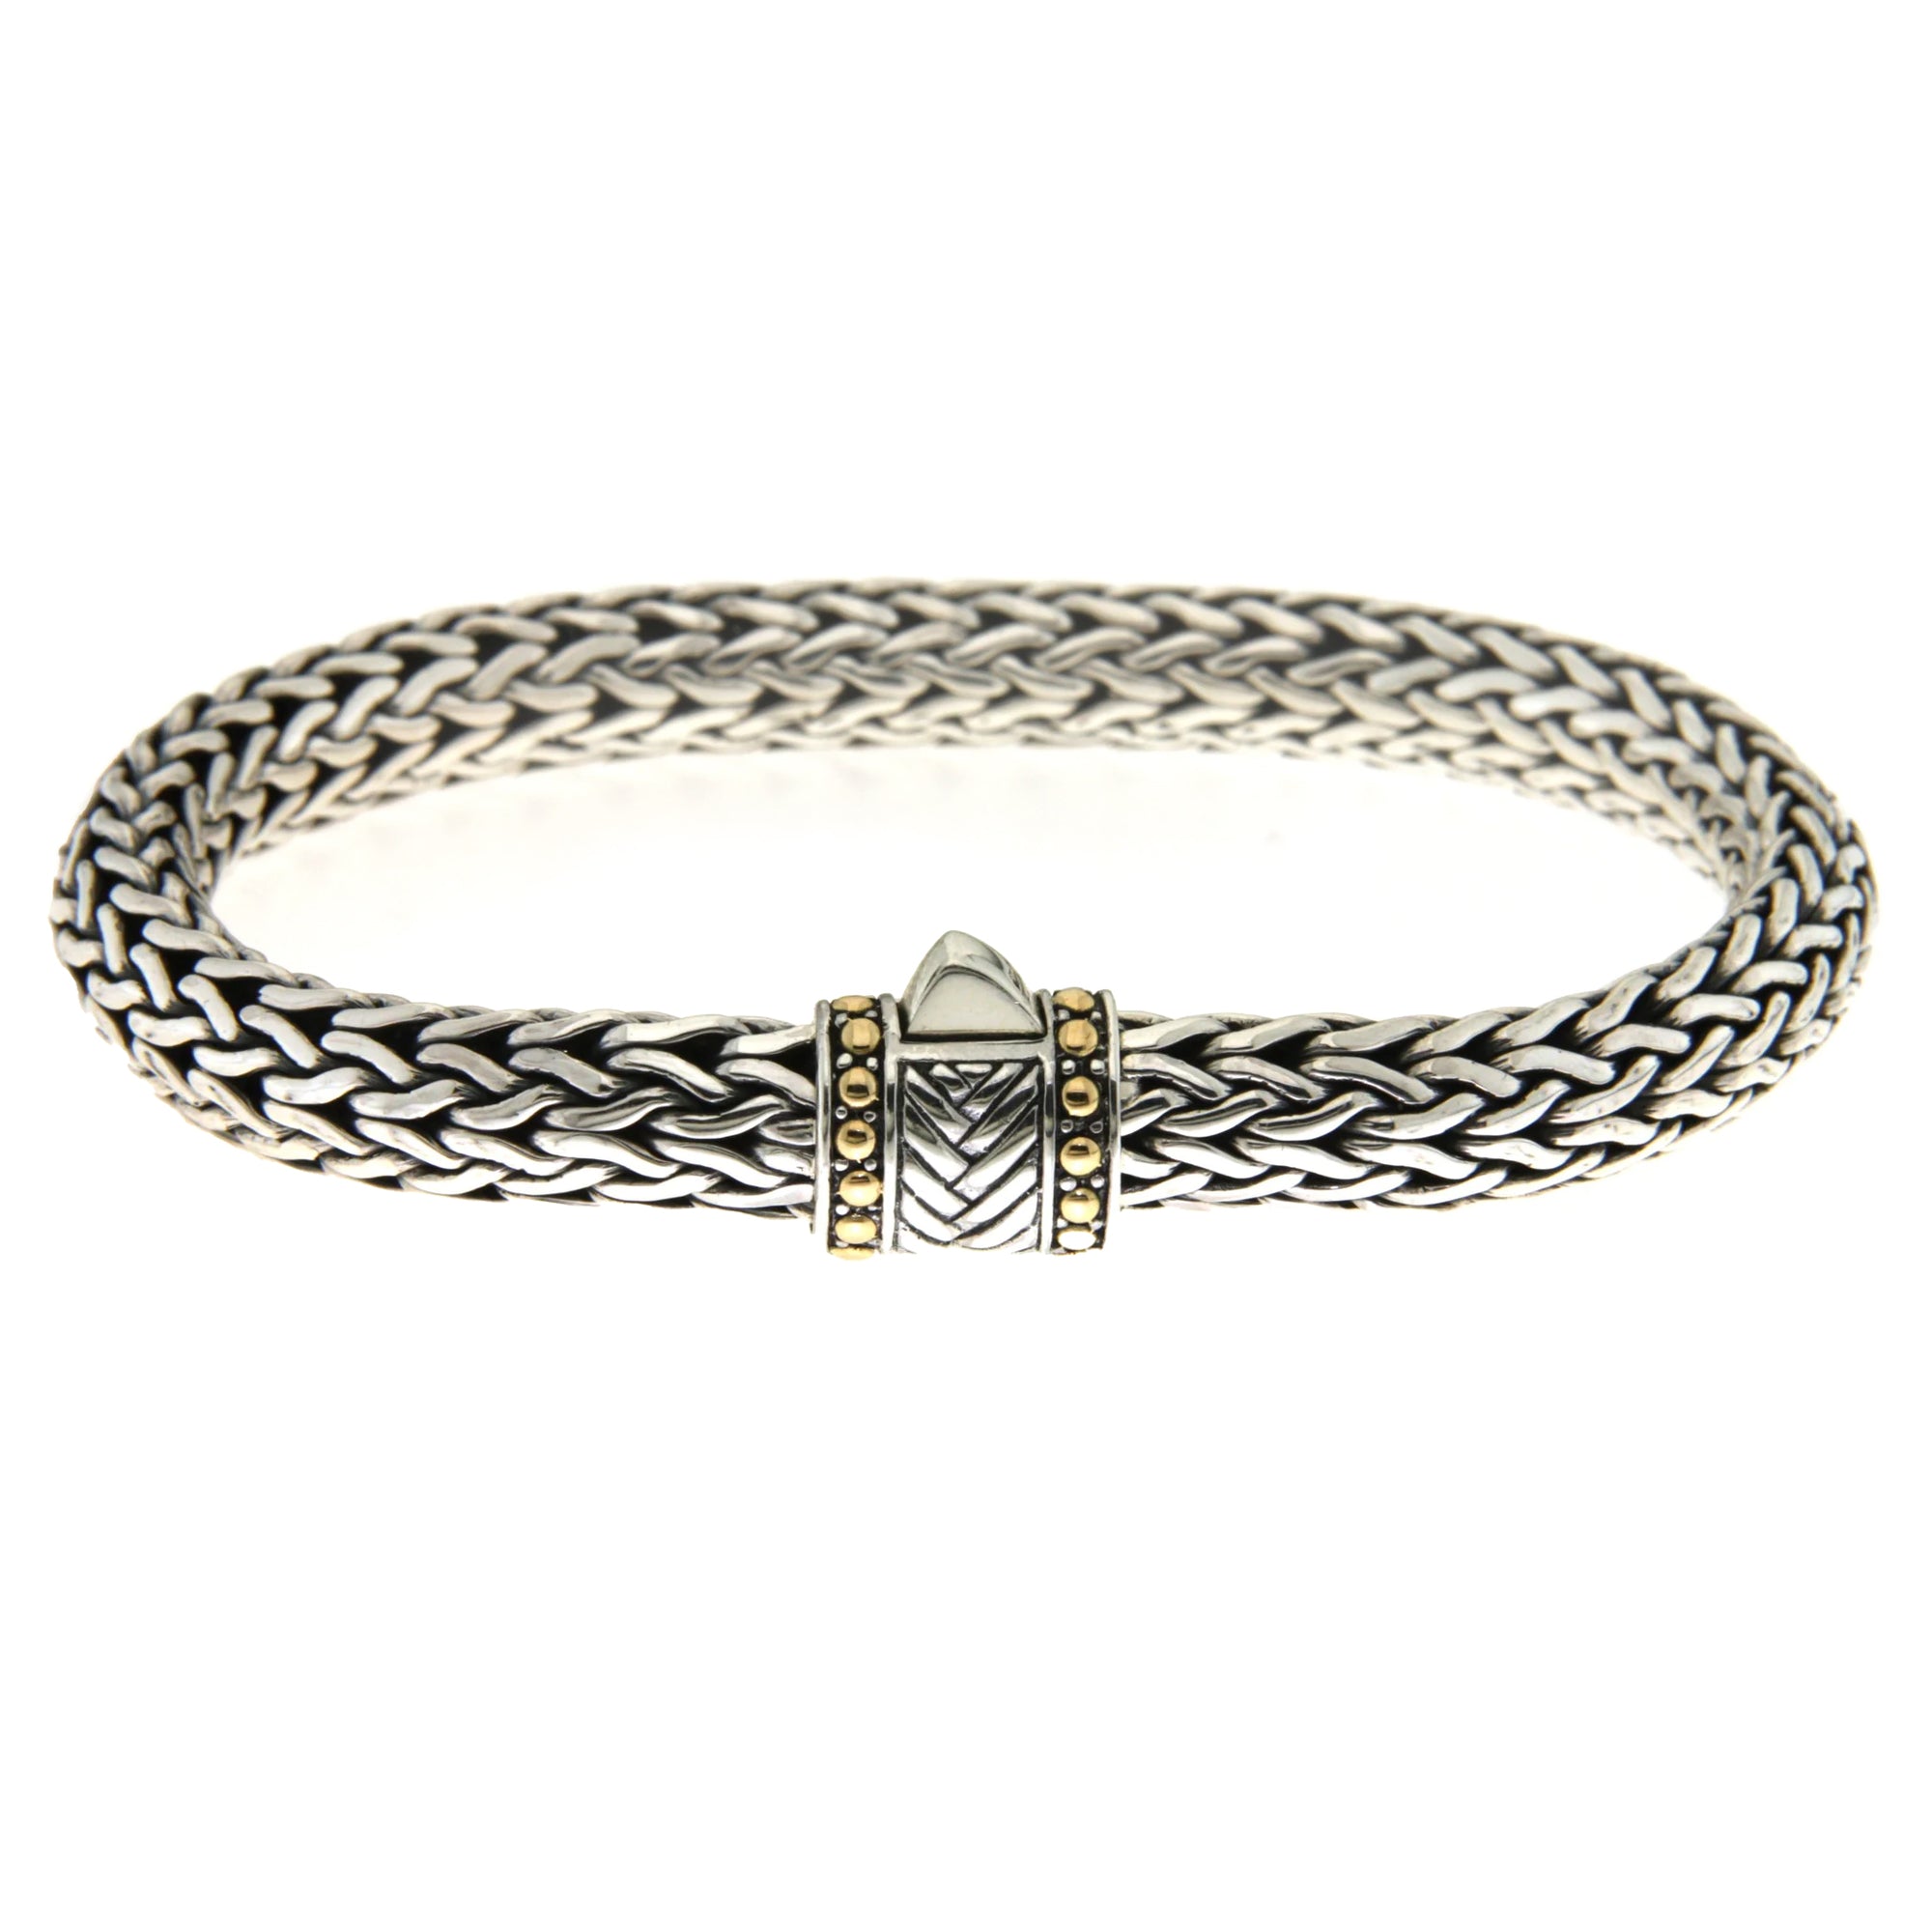 Royal Palm Bracelet available at Talisman Collection Fine Jewelers in El Dorado Hills, CA and online. Specs: Royal Palm Bracelet is crafted in Sterling Silver with 18k gold accents. 8".